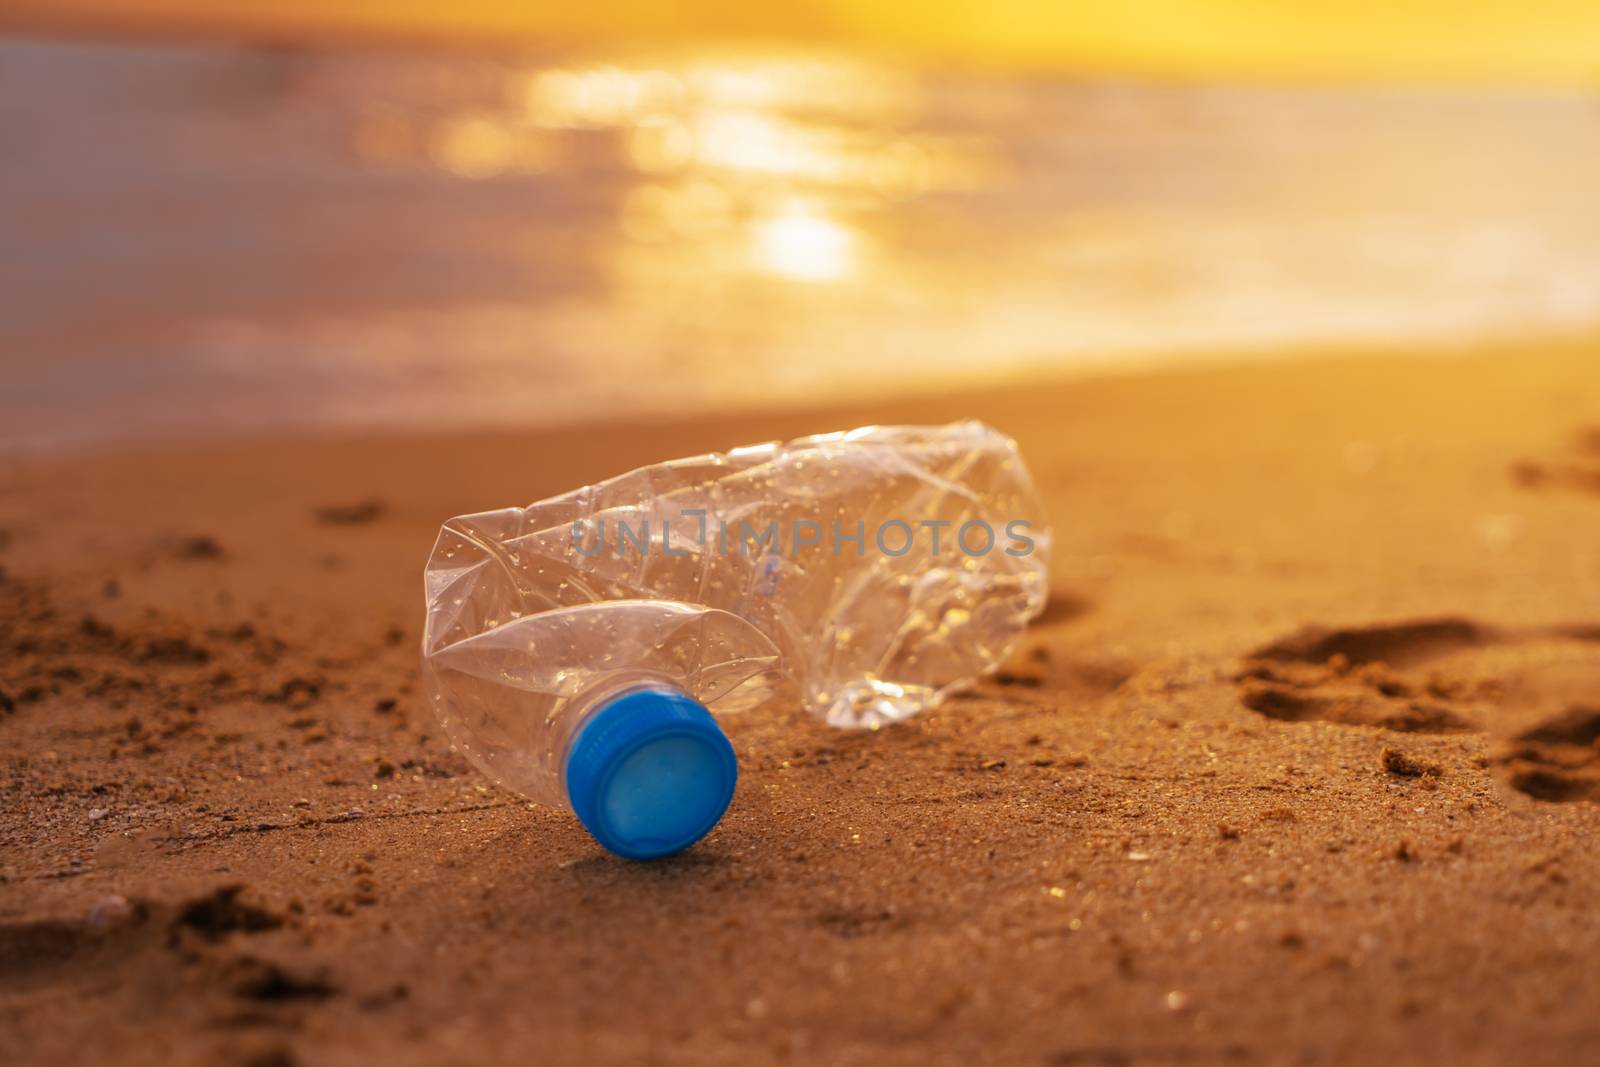 The plastic bottle  on the beach at the sunset, keep clean up the beach